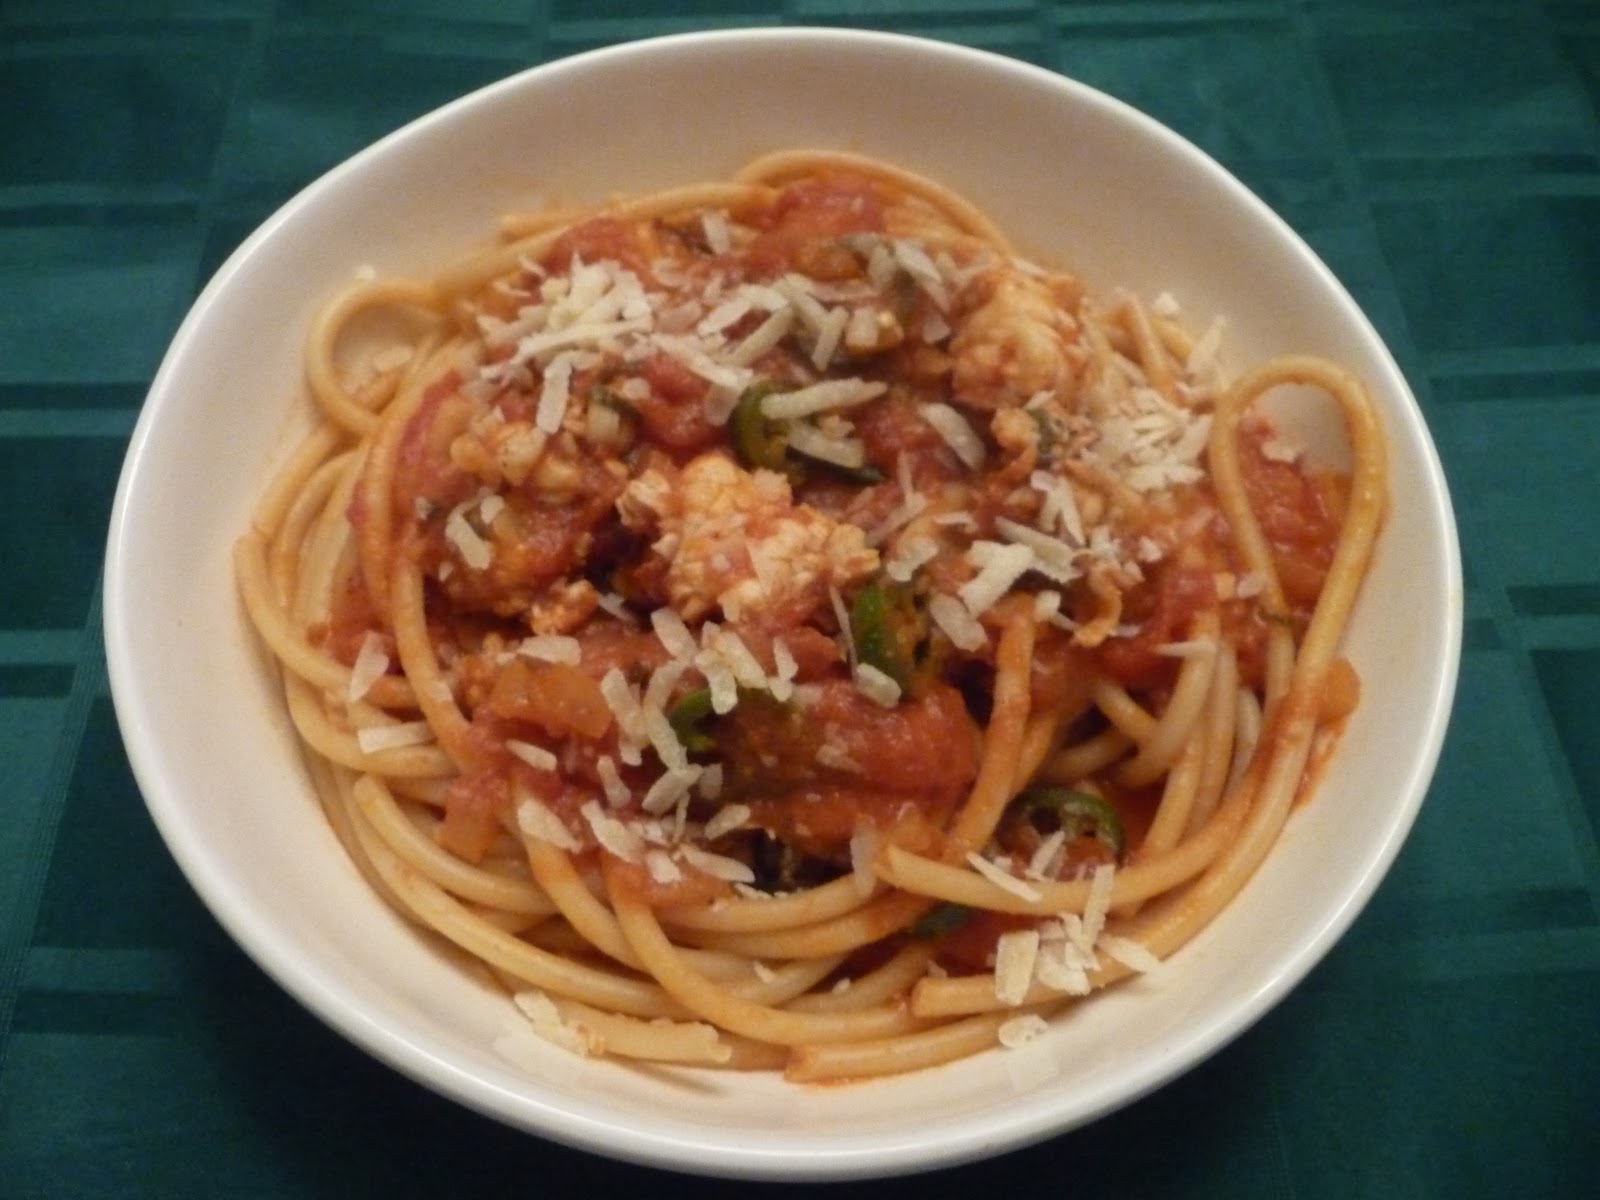 Bucatini; the spaghetti with a hole! – The Pasta Project